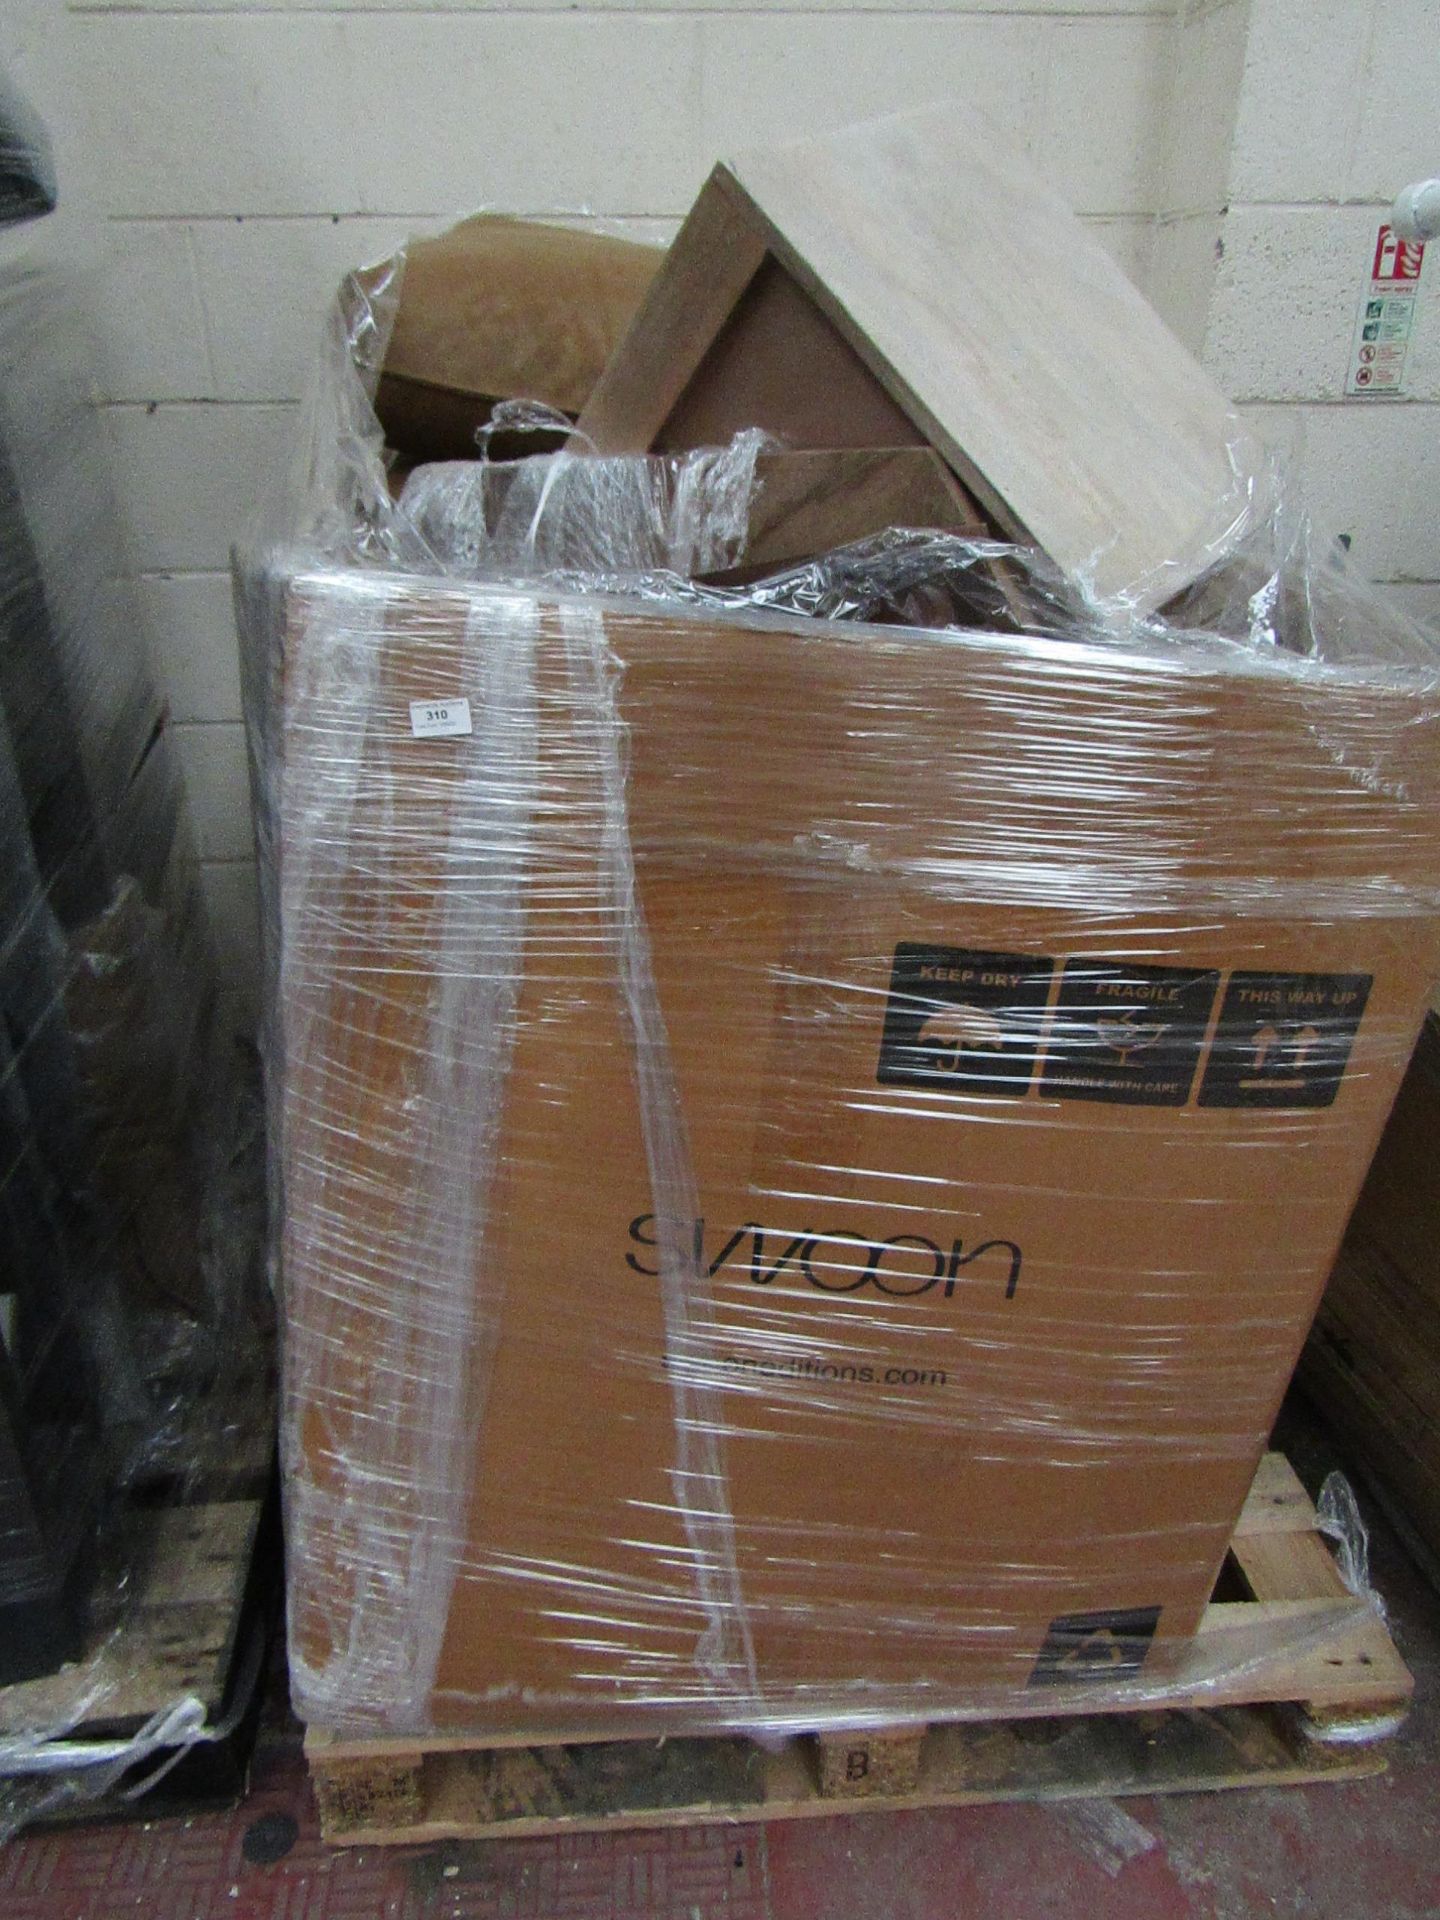 | 1X | PALLET OF SWOON  B.E.R FURNITURE, UNMANIFESTED, WE HAVE NO IDEA WHAT IS ON THESE PALLETS OR